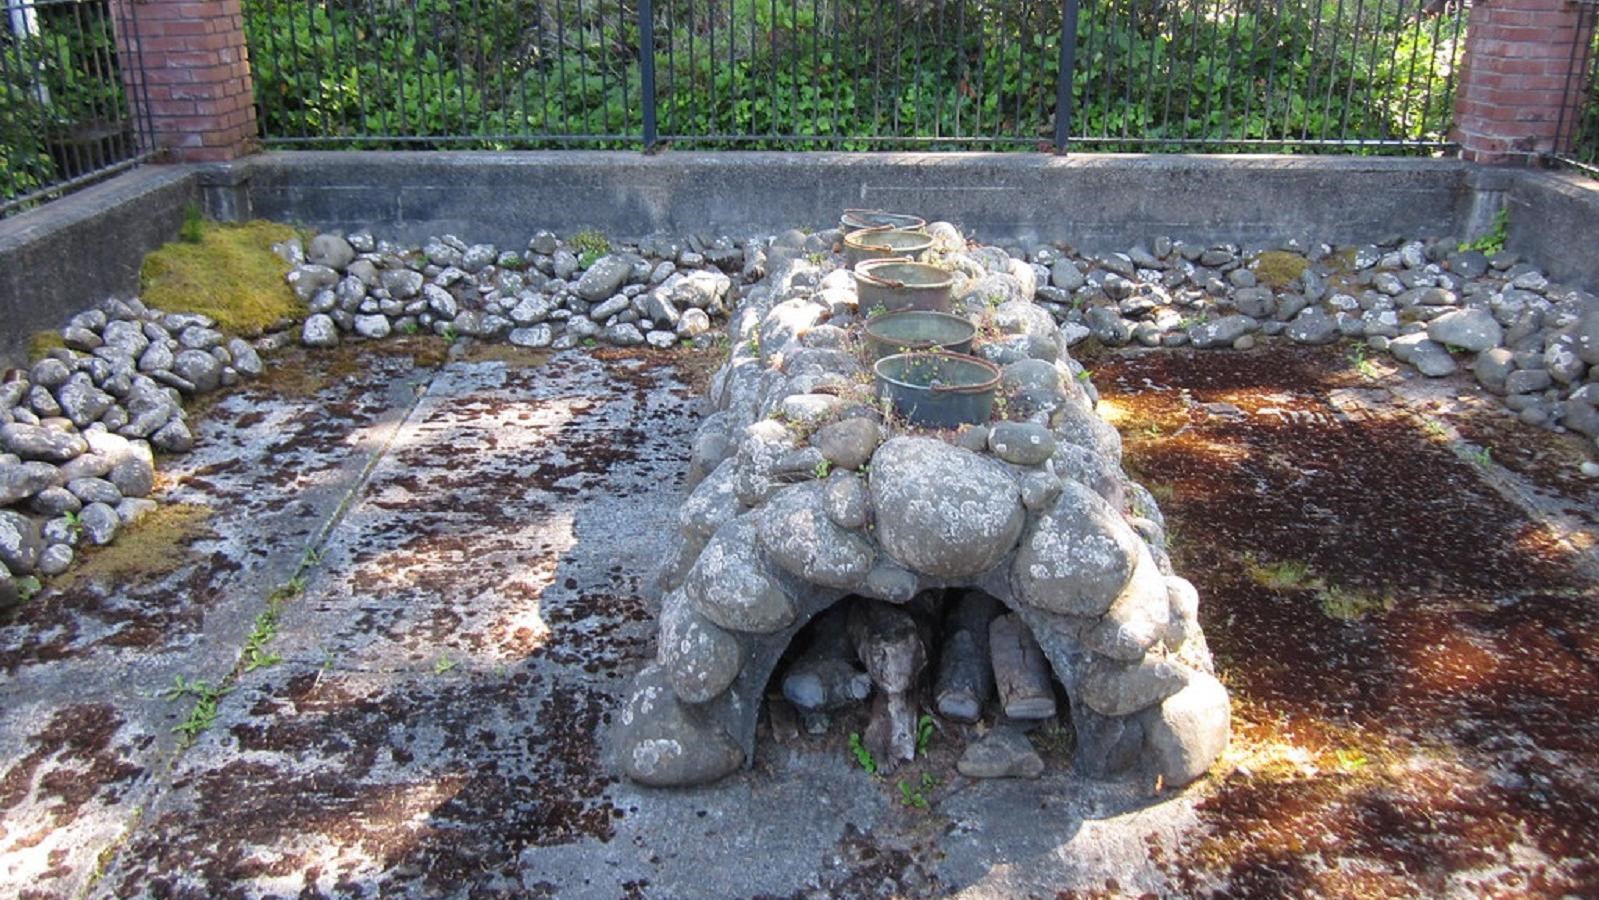 A stone cairn with 5 metal buckets on top sits in the center of small courtyard surrounded by fence